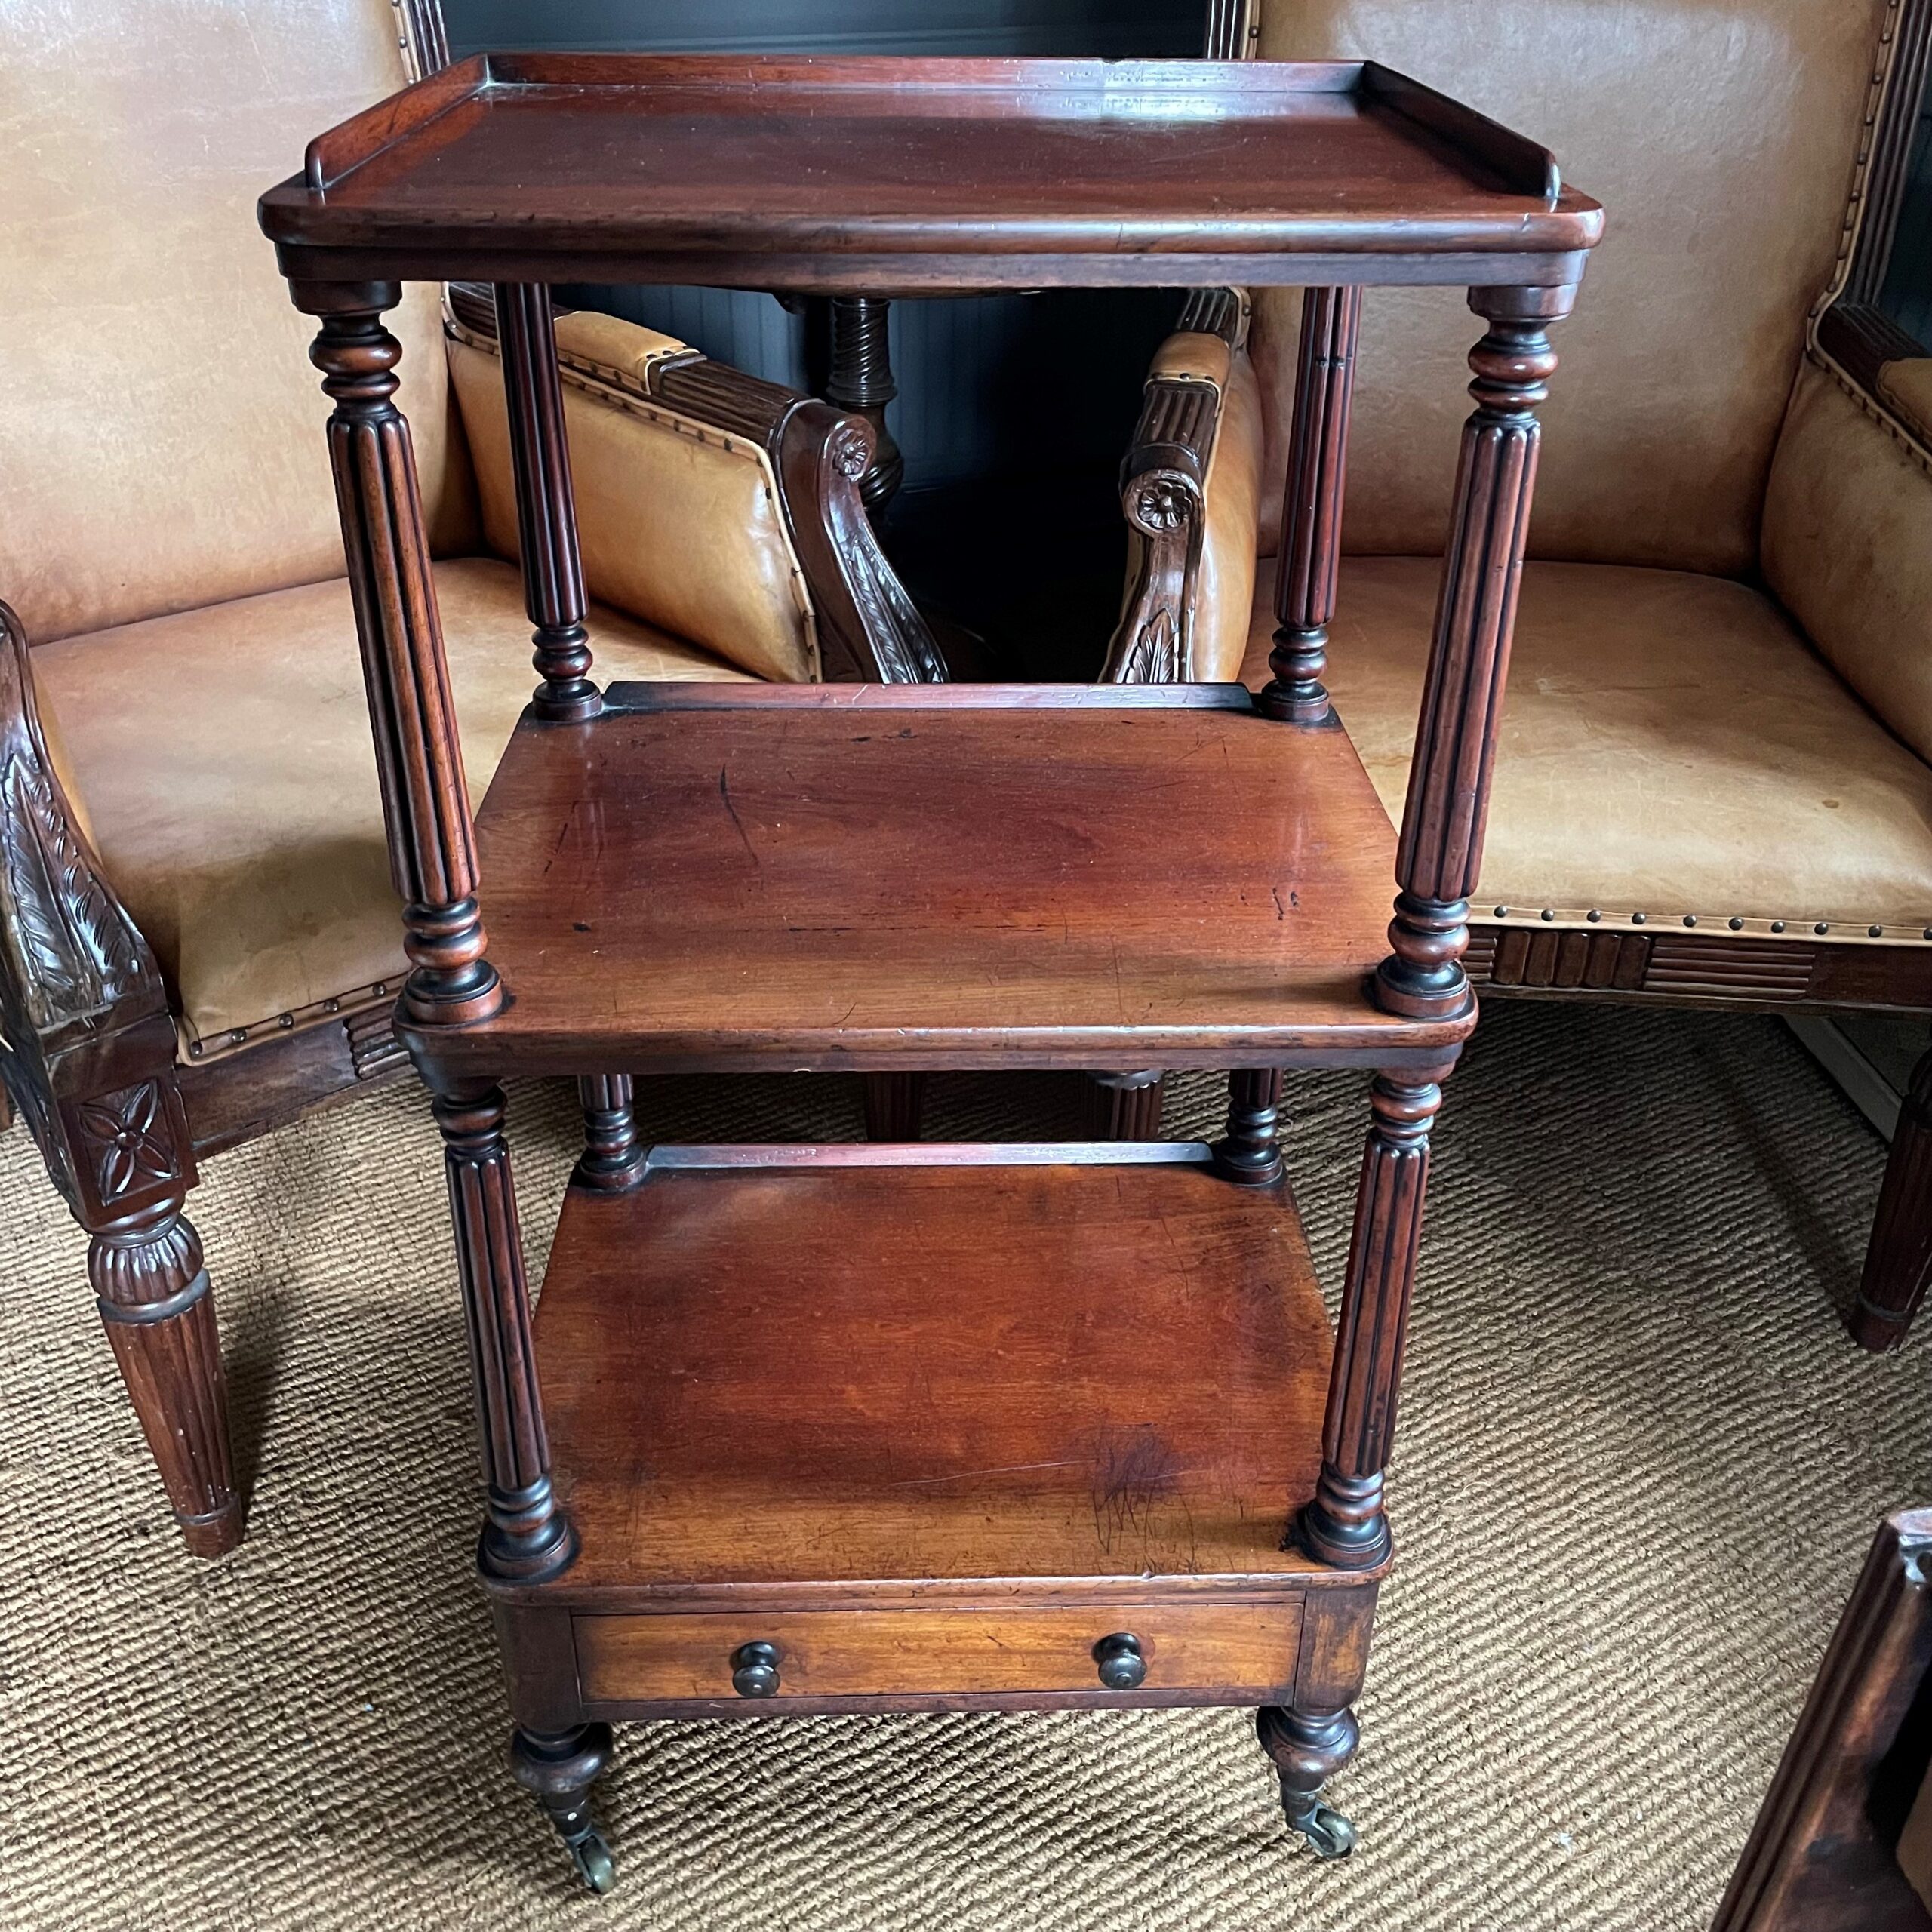 Two Tiered Whatnot – $1,700.00 – Pillar & Post